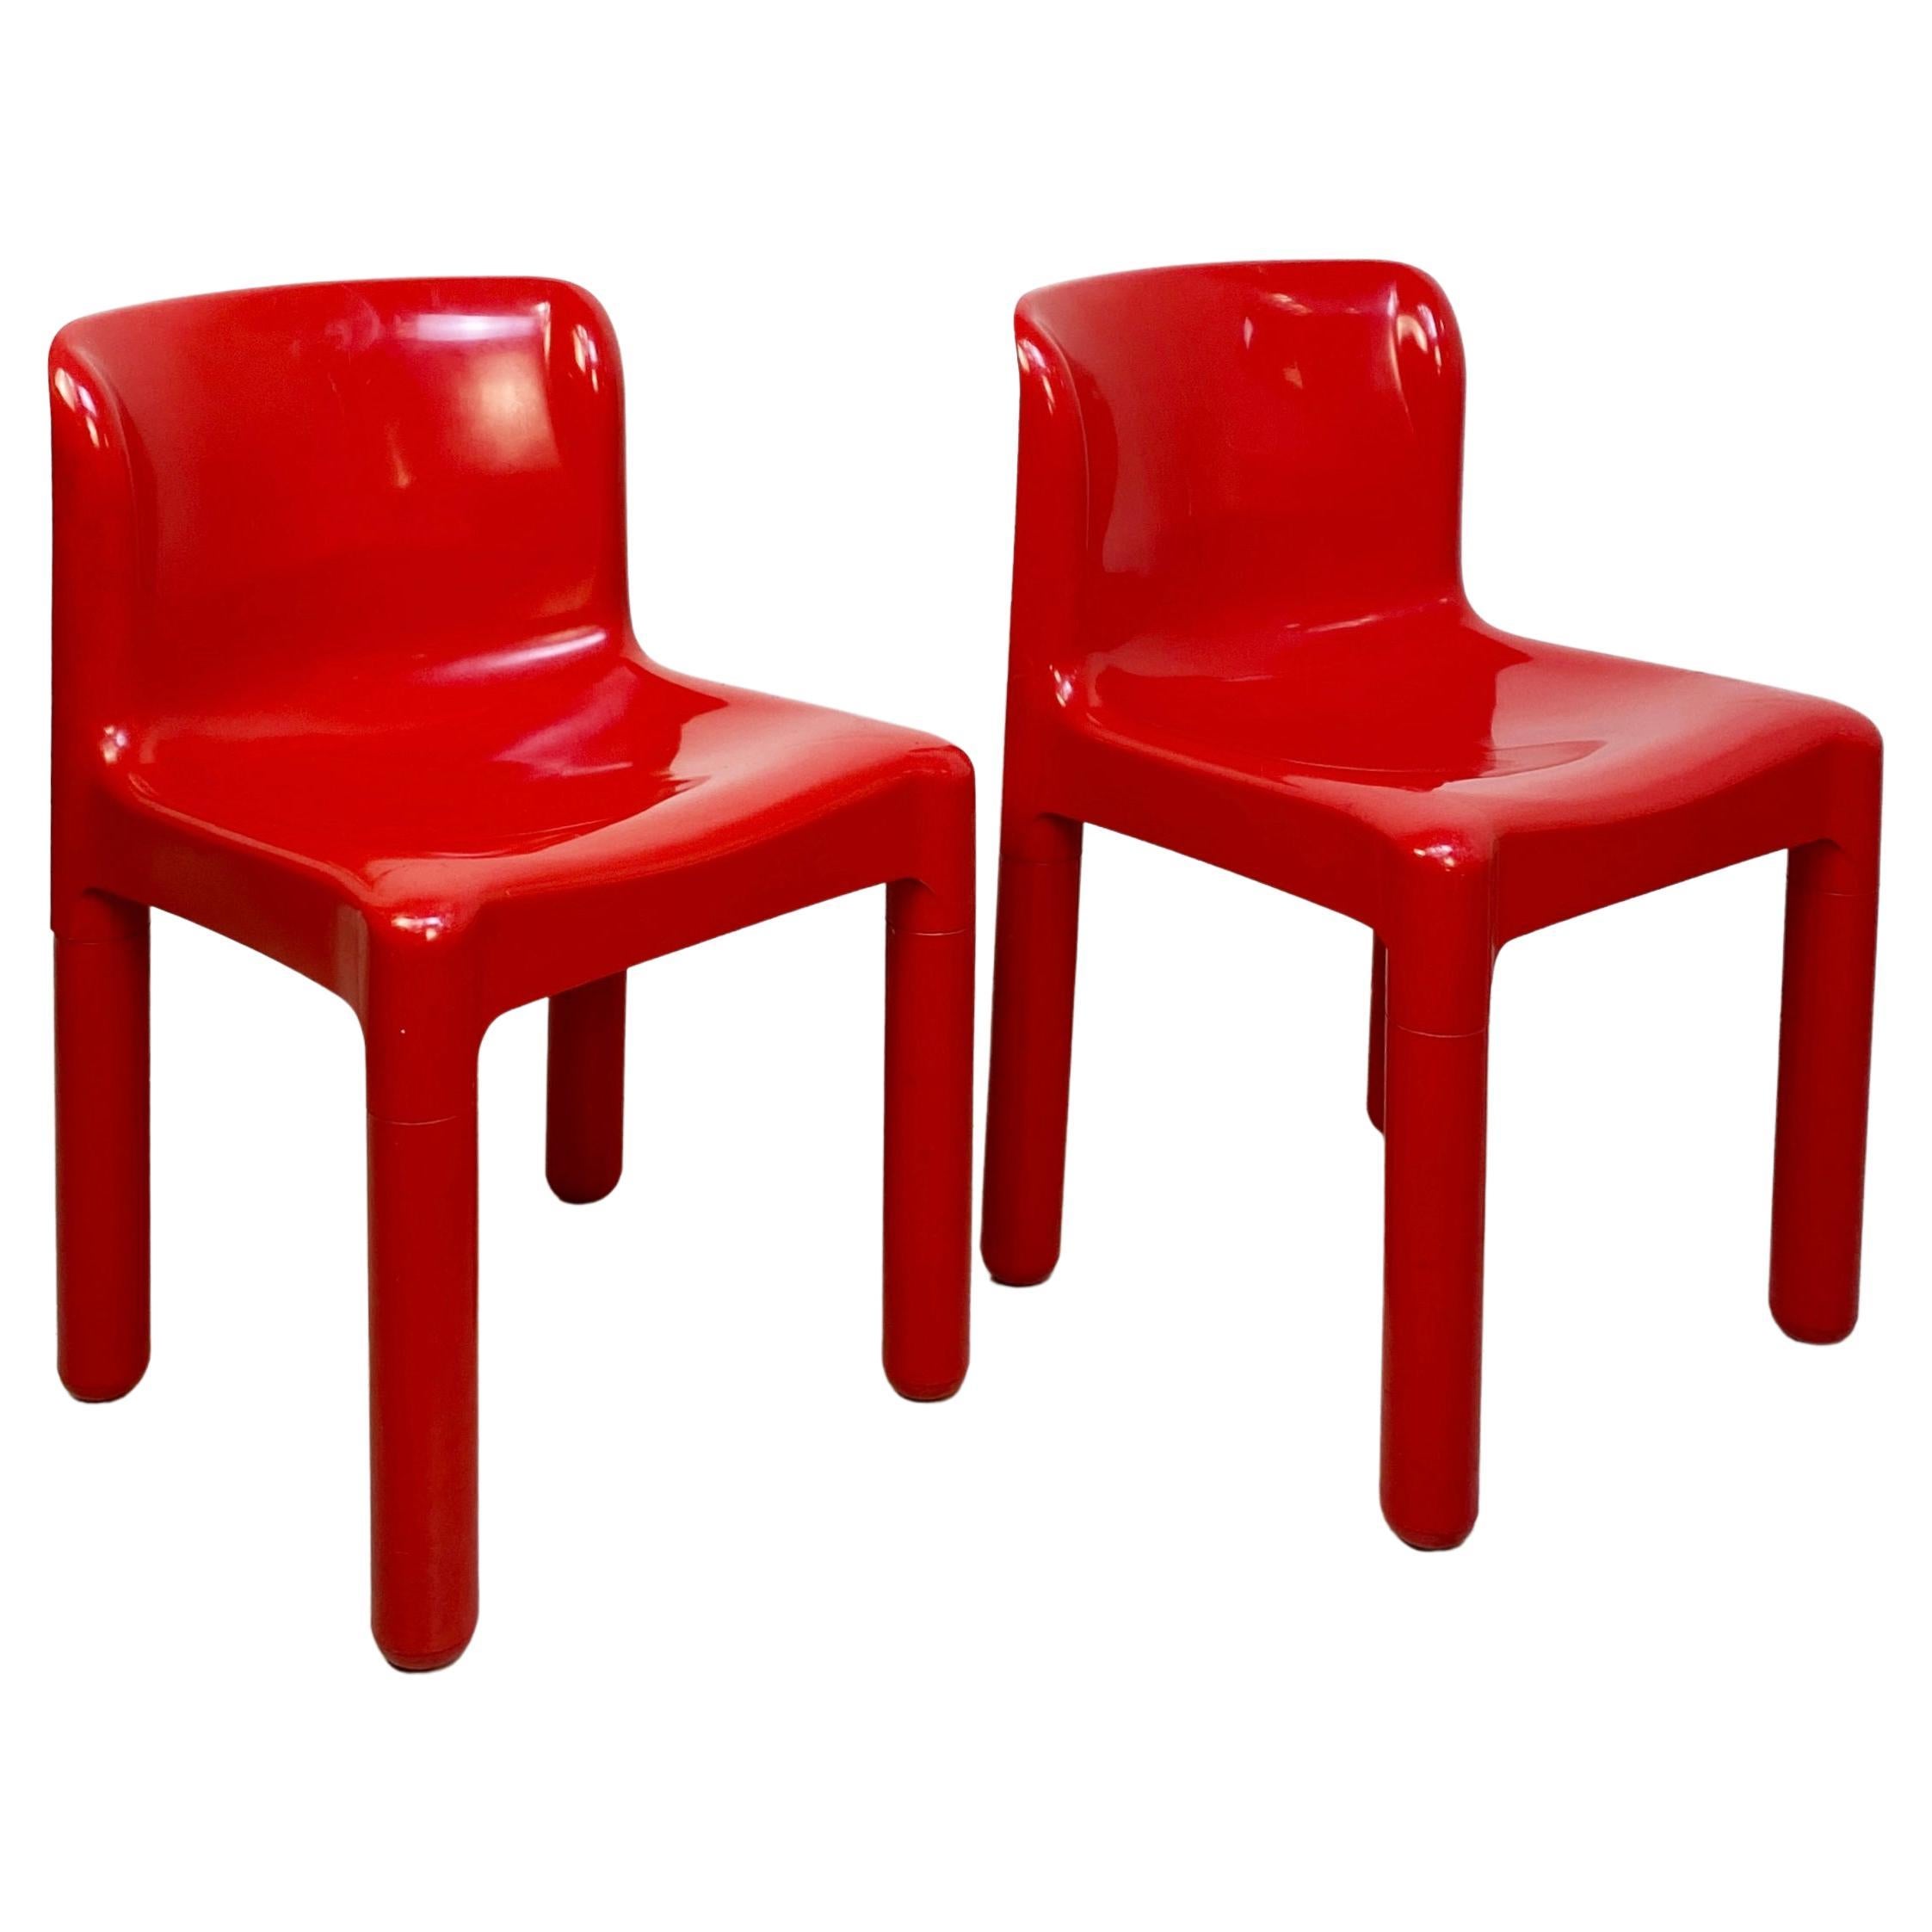 Italian Modern Red Chairs Mod. 4875 by Carlo Bartoli for Kartell, 1970s